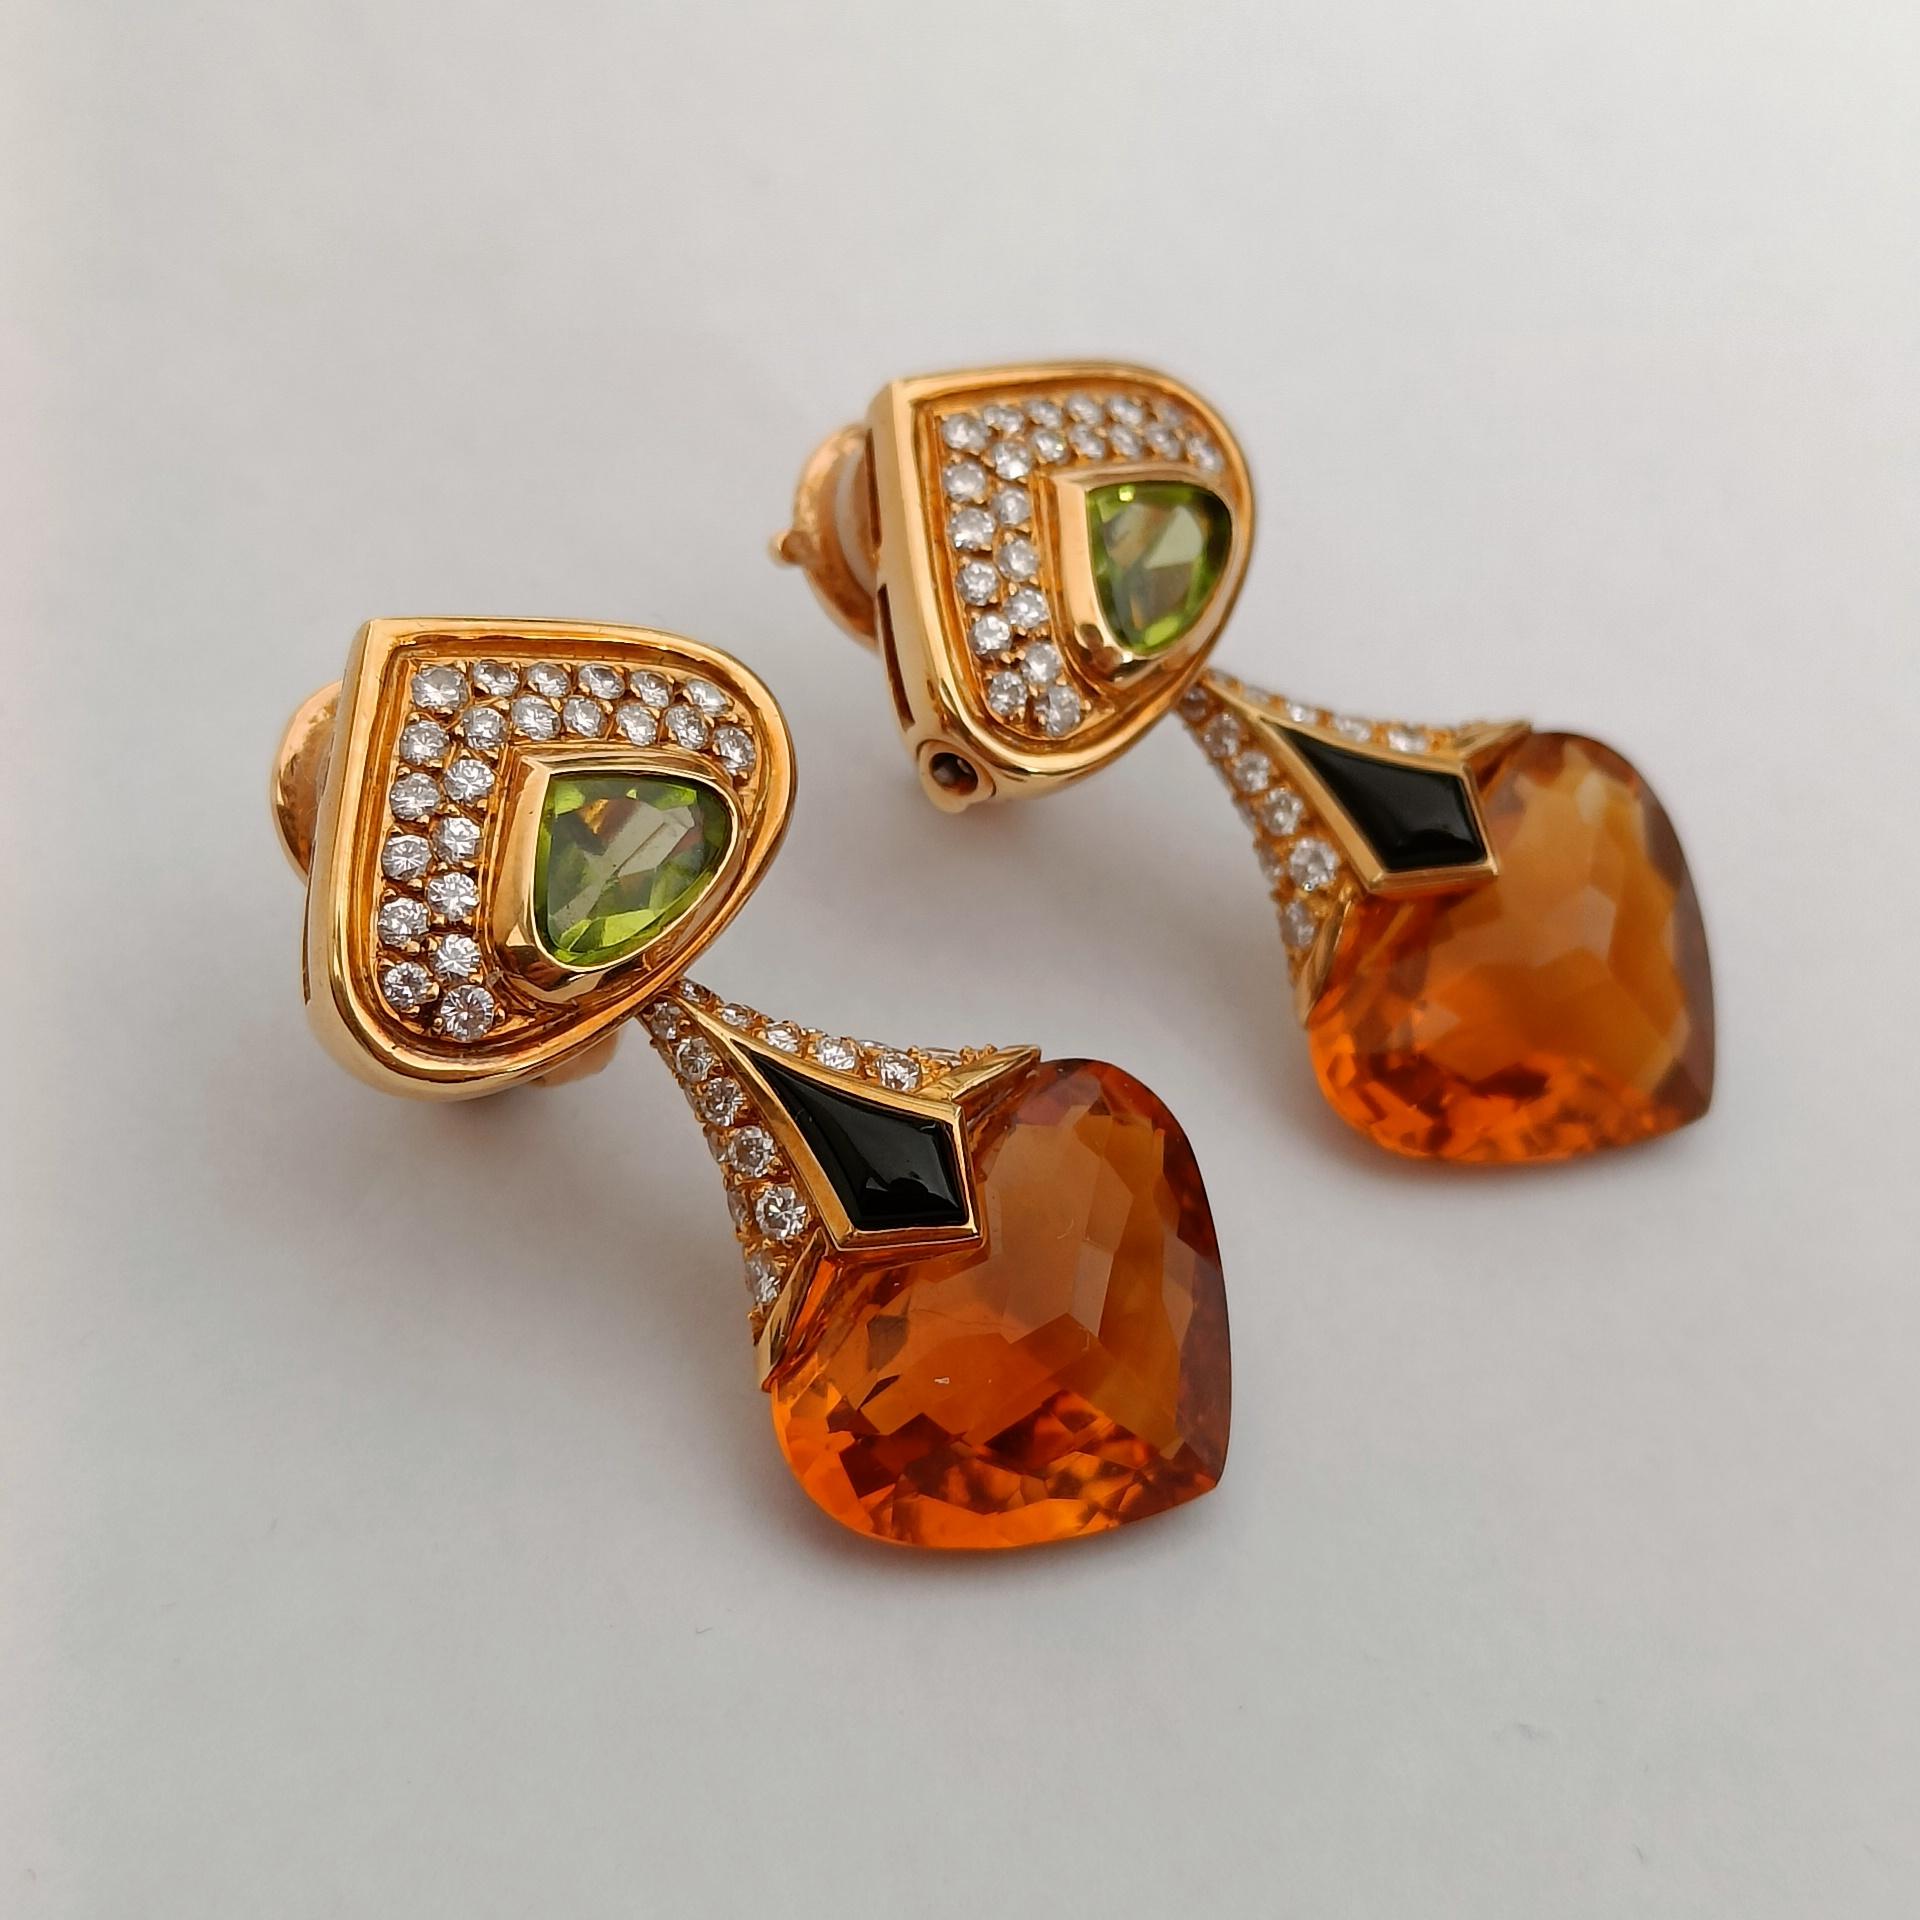 Marina B, a pair of 18k yellow gold pendant earrings (clip-on), adorned with a pear-shaped peridot in a closed setting topped with a pavé of brilliant-cut diamonds, holding a faceted pear-shaped citrine enhanced with onyx.

Signed Marina B, made in